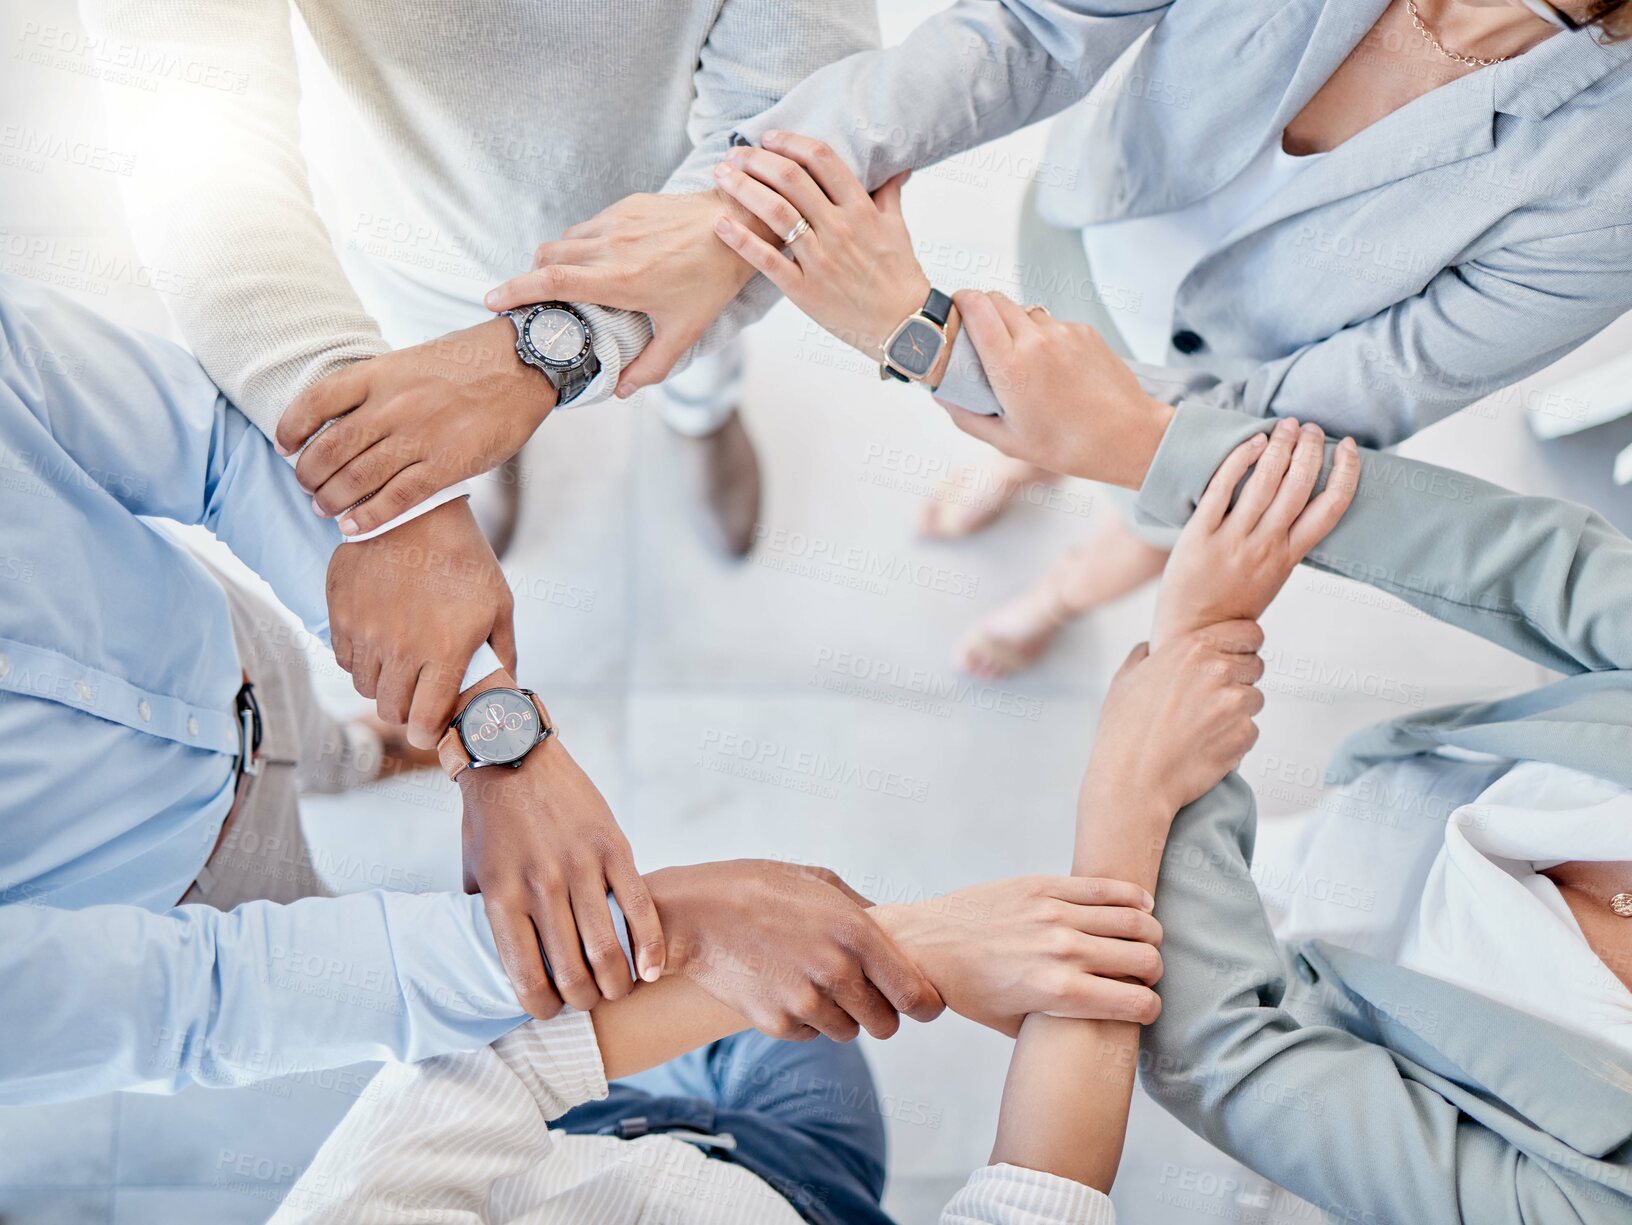 Buy stock photo Above business people, trust circle and holding hands for motivation, teamwork or group goal at finance company. Businessman, women and helping hand for support, diversity and solidarity in workplace